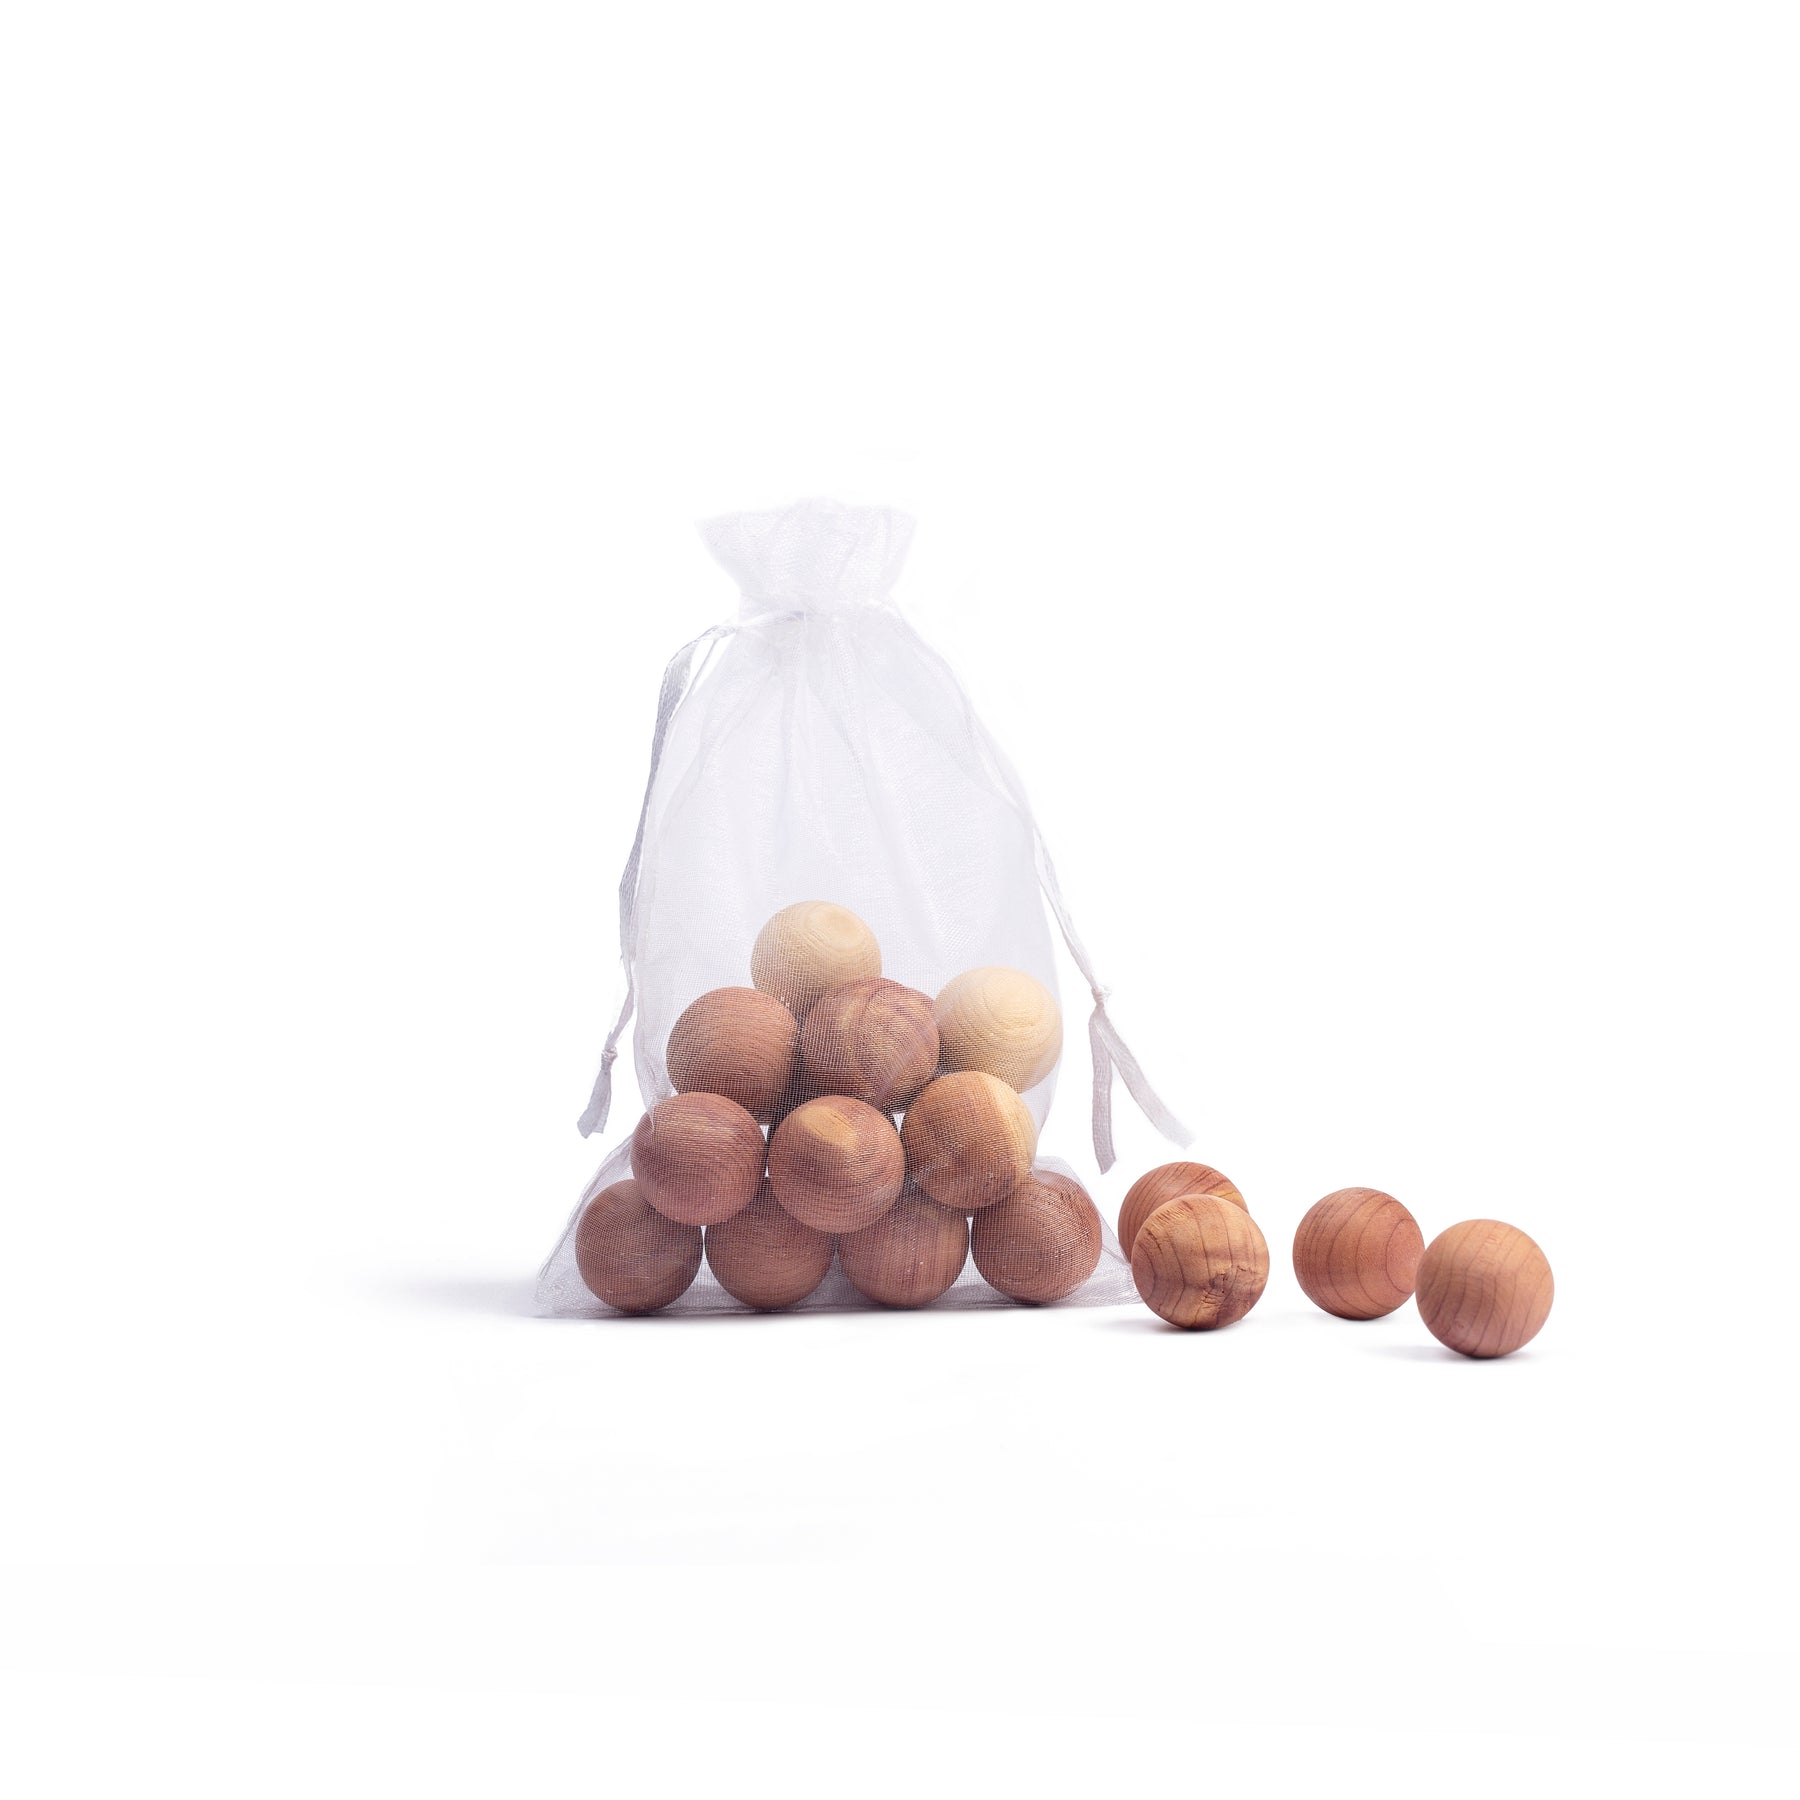 Small see through bag with canada red cedarwood balls with 4 balls separate on white background